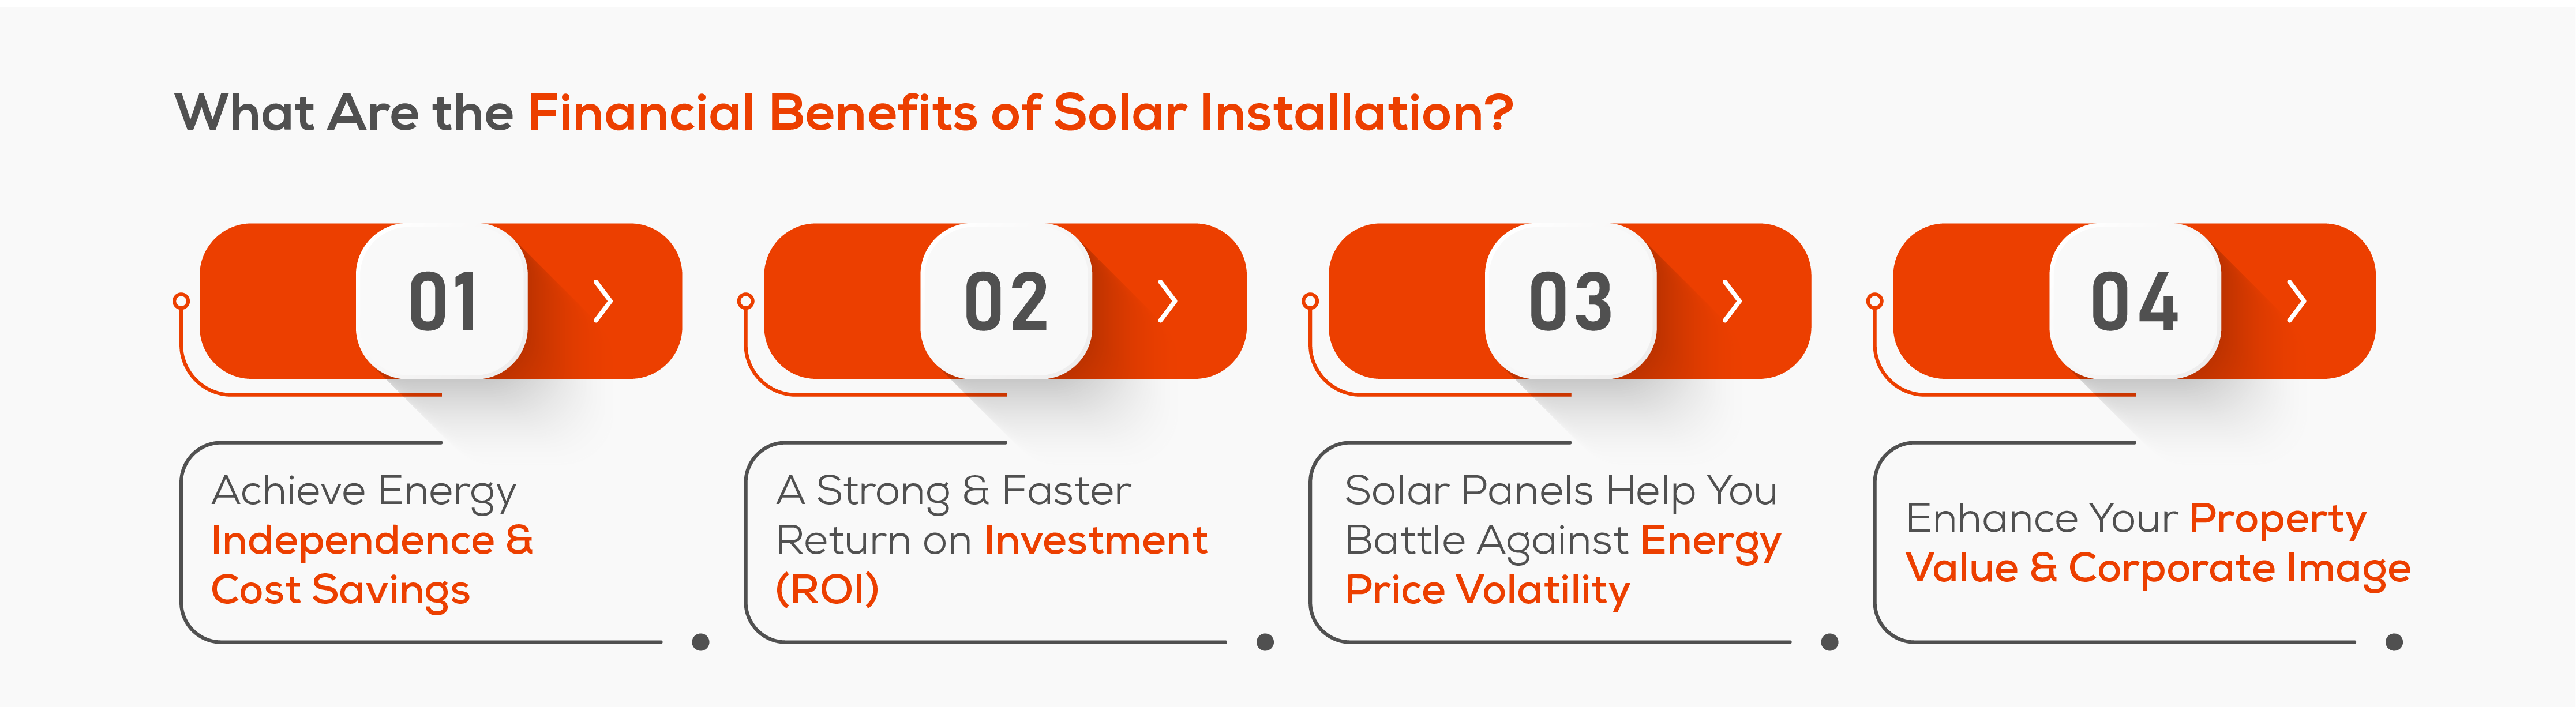 What Are the Financial Benefits of Going Solar? 